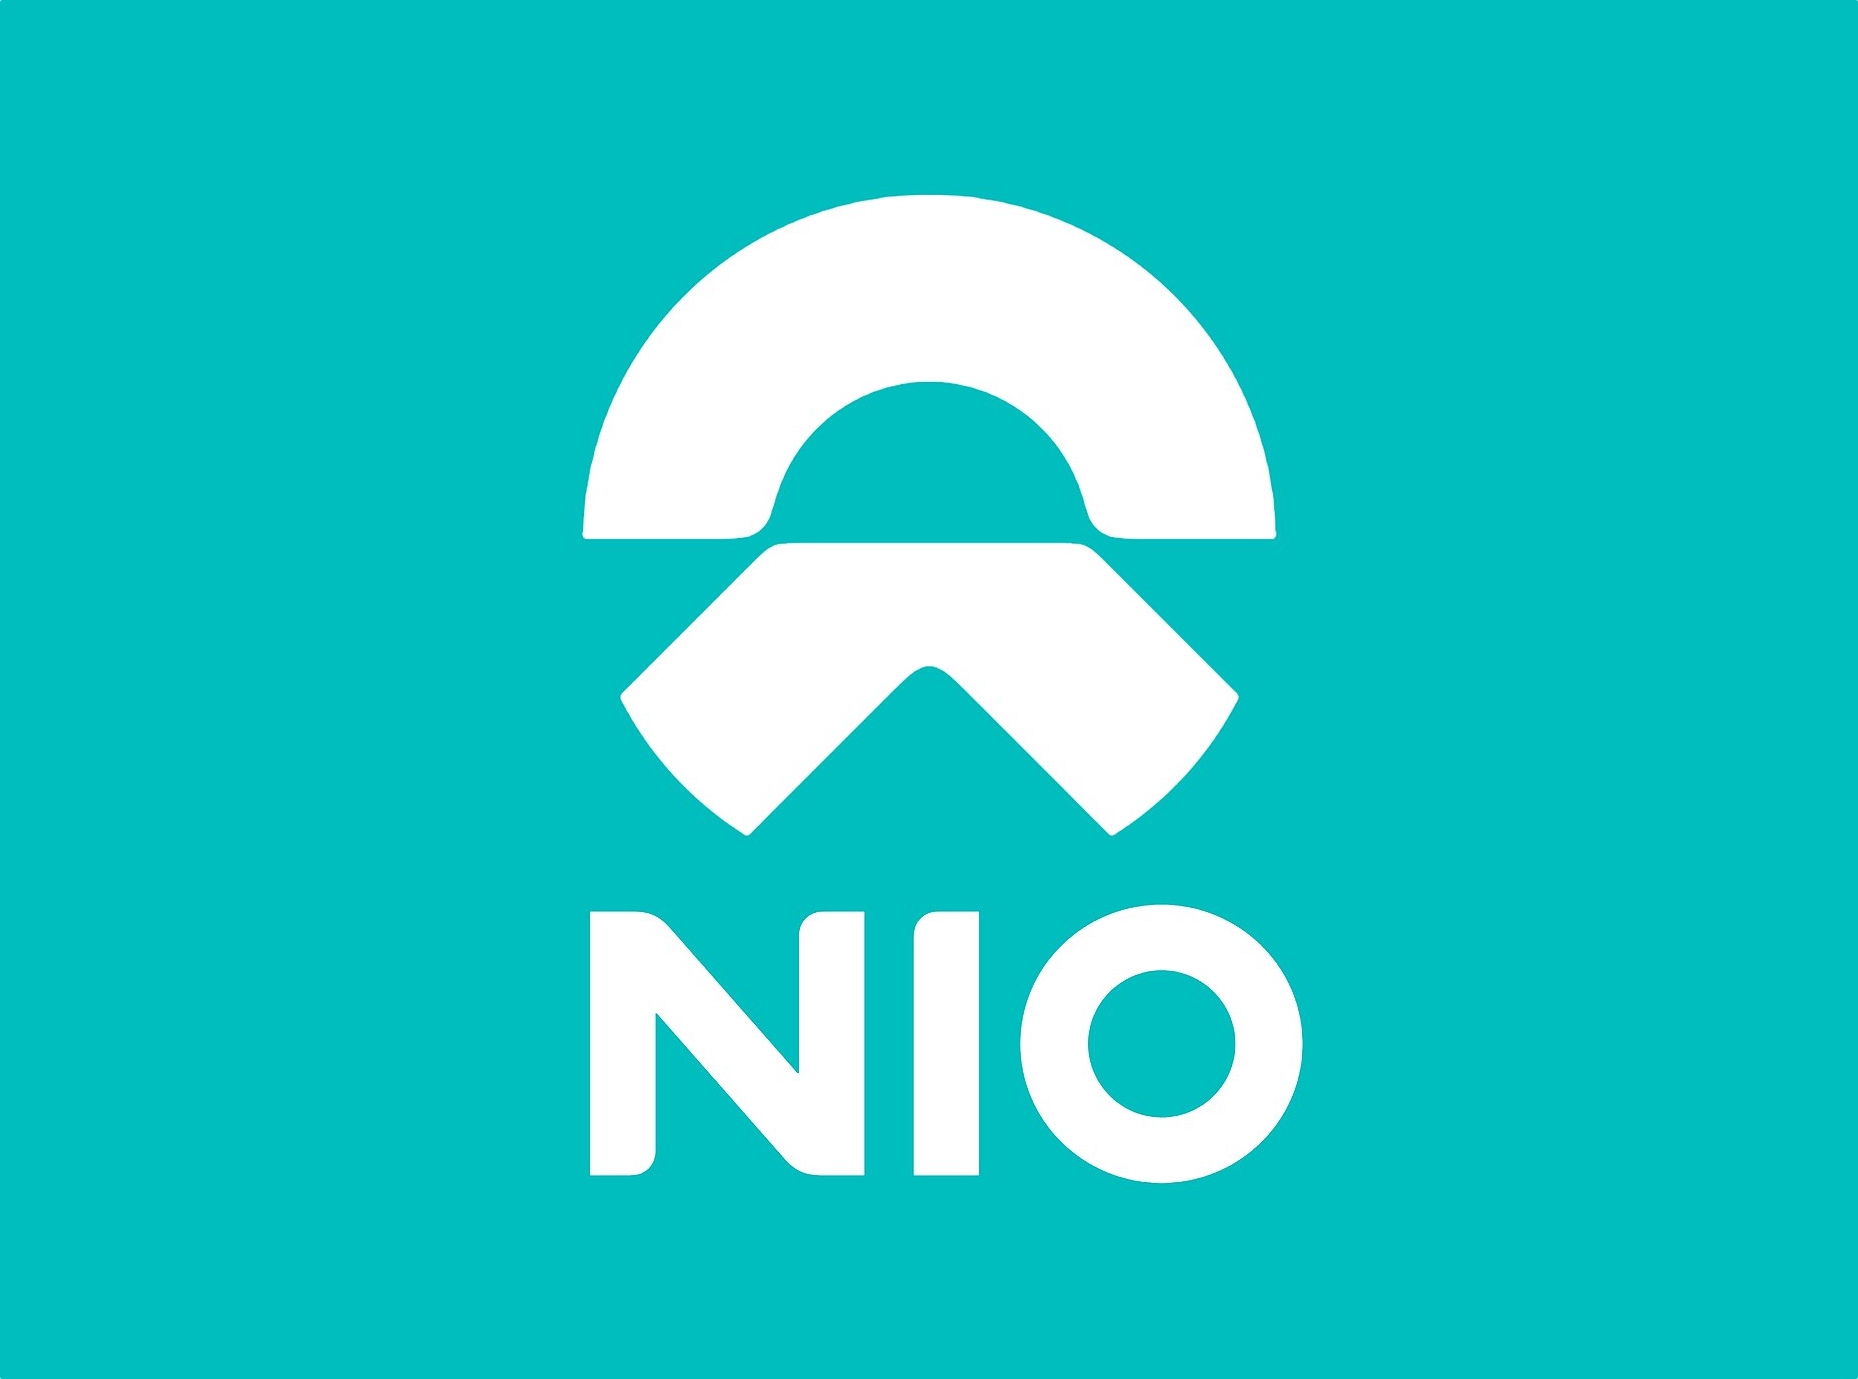 Chinese electric car manufacturer Nio will start producing smartphones, the first novelty may be released in 2023